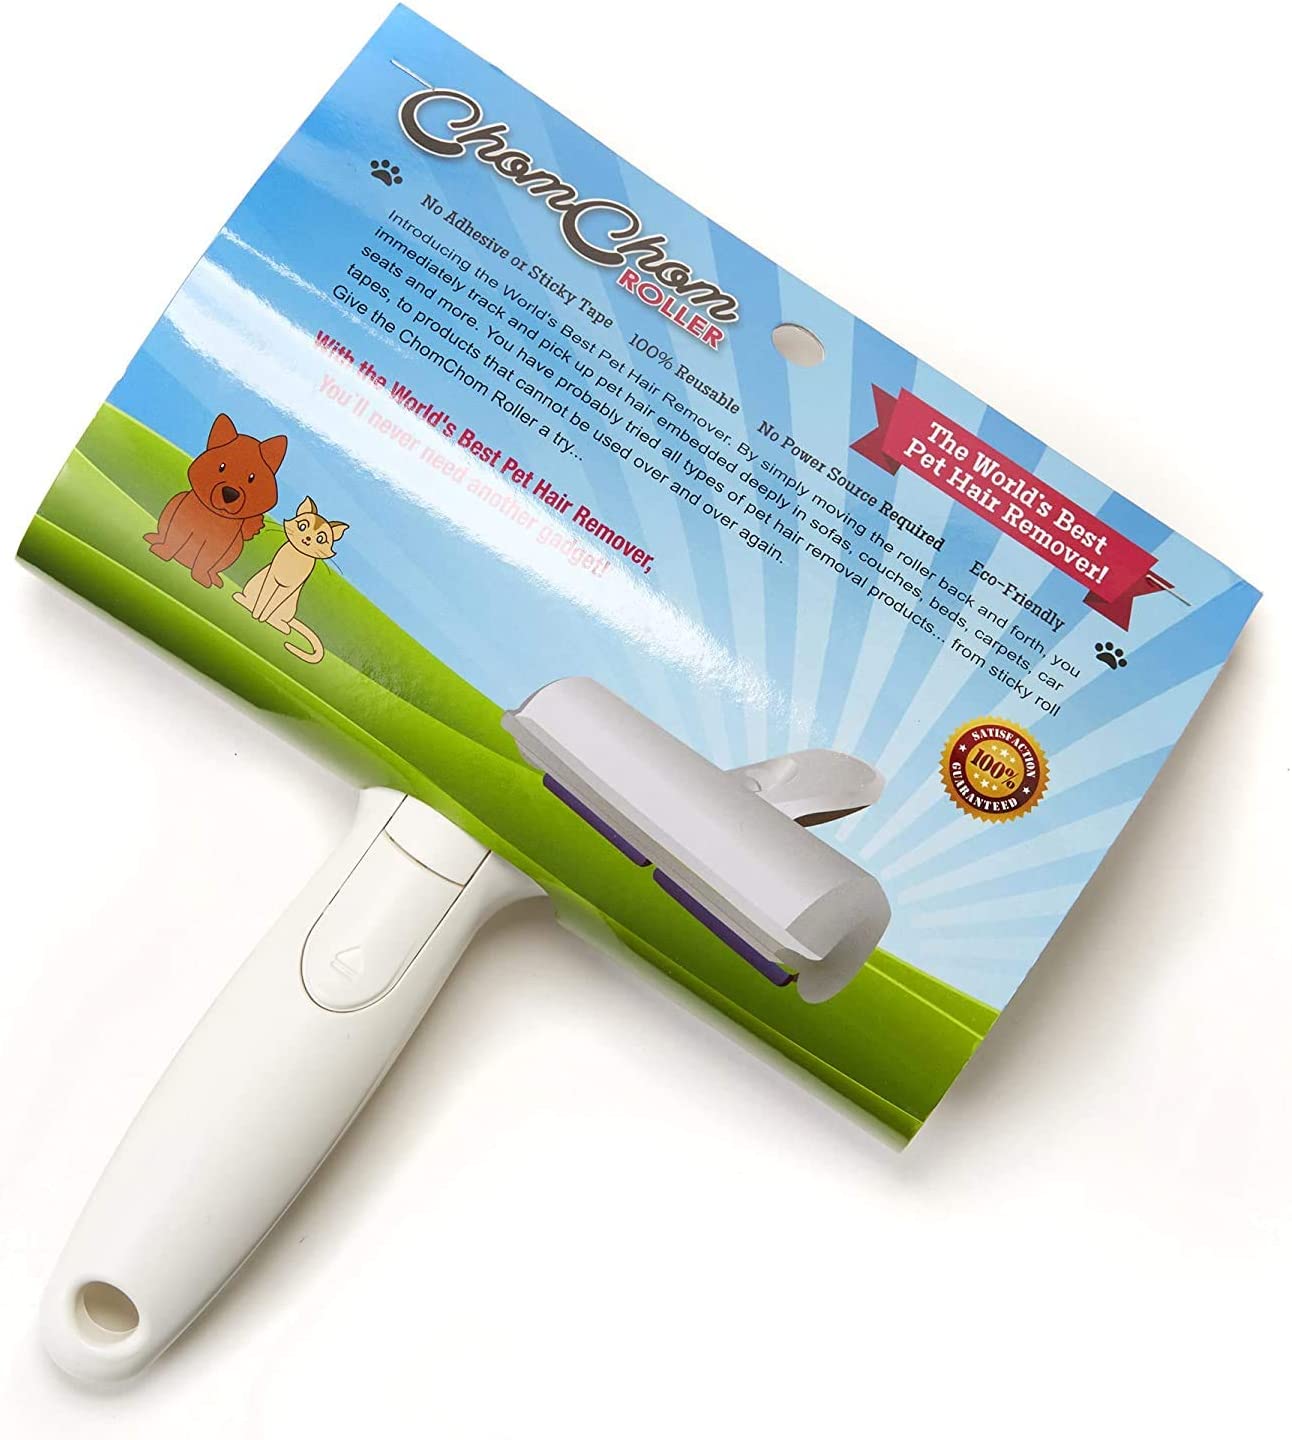 Our Favorite Products for Dog Owners: ChomChom Pet Hair Remover